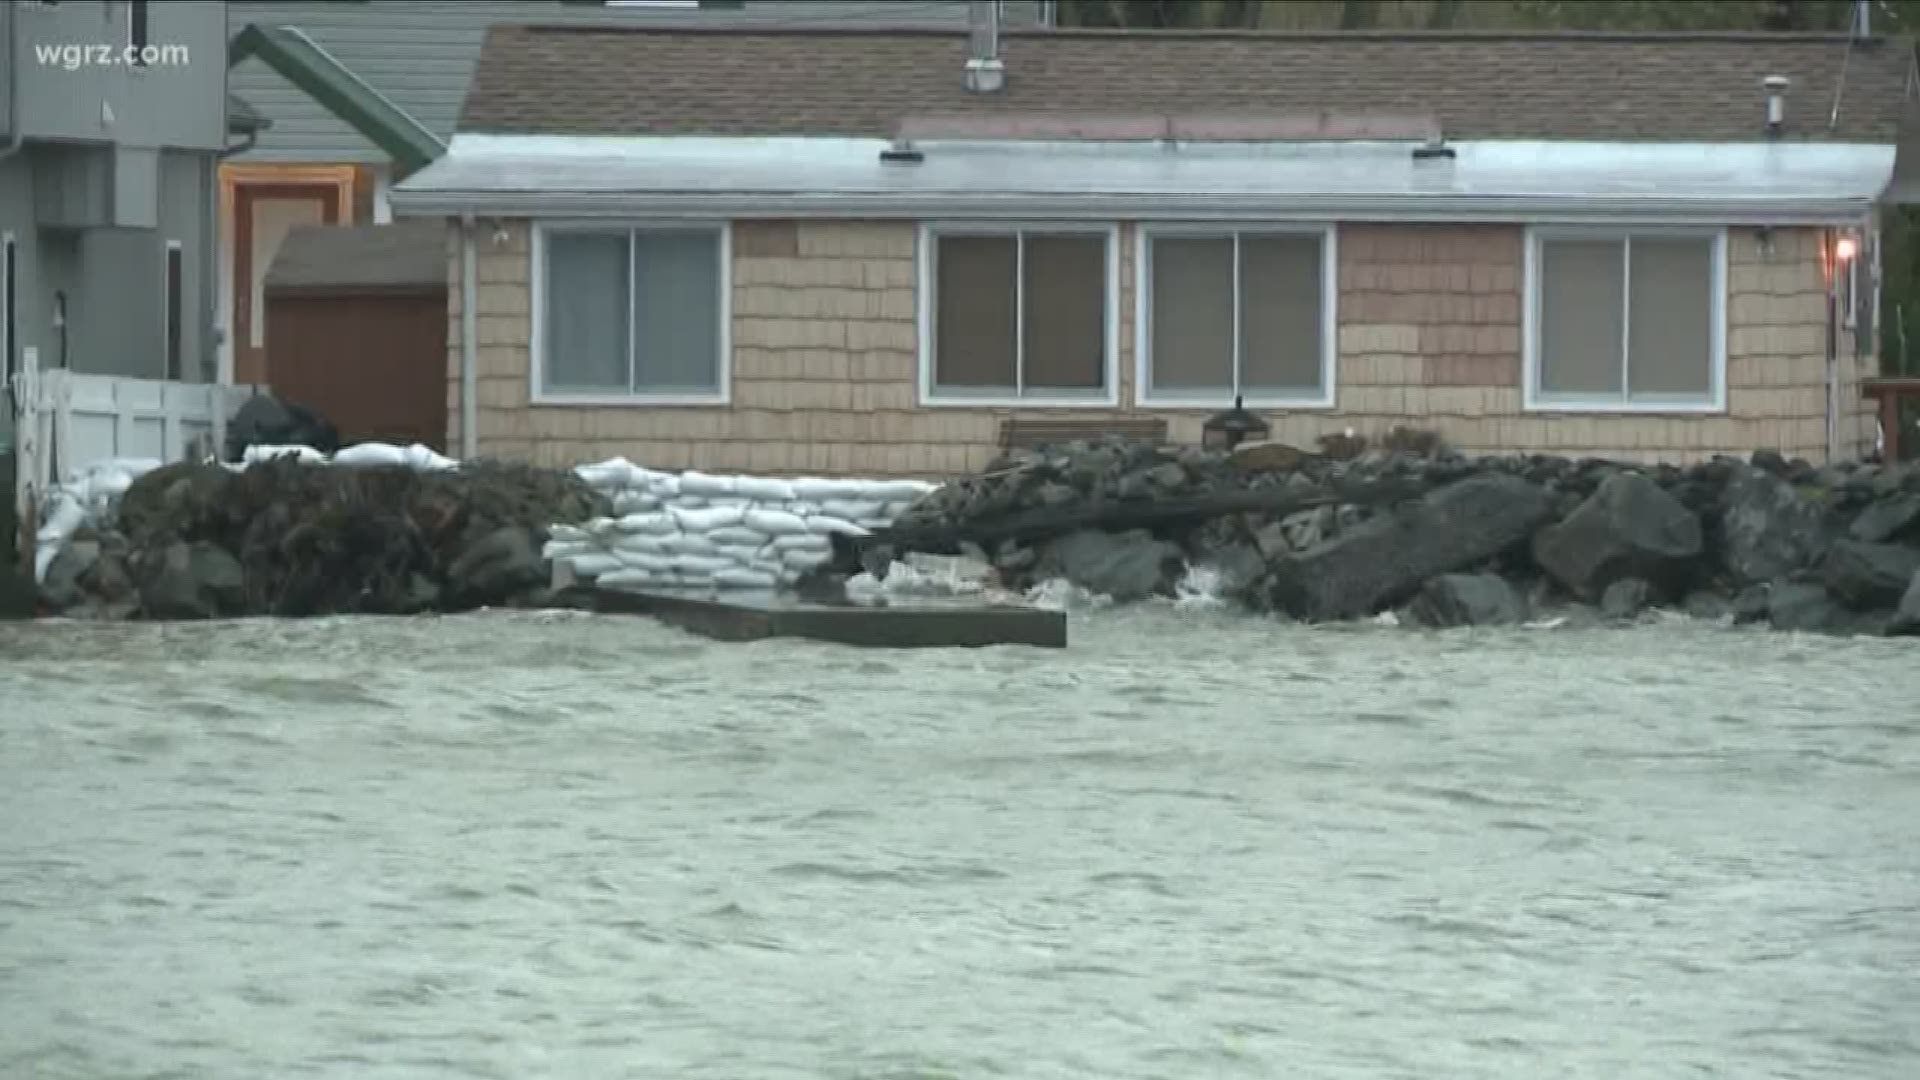 The state claims the International Joint Commission failed to implement its flood protocol and did not provide relief to waterfront homes and business owners.